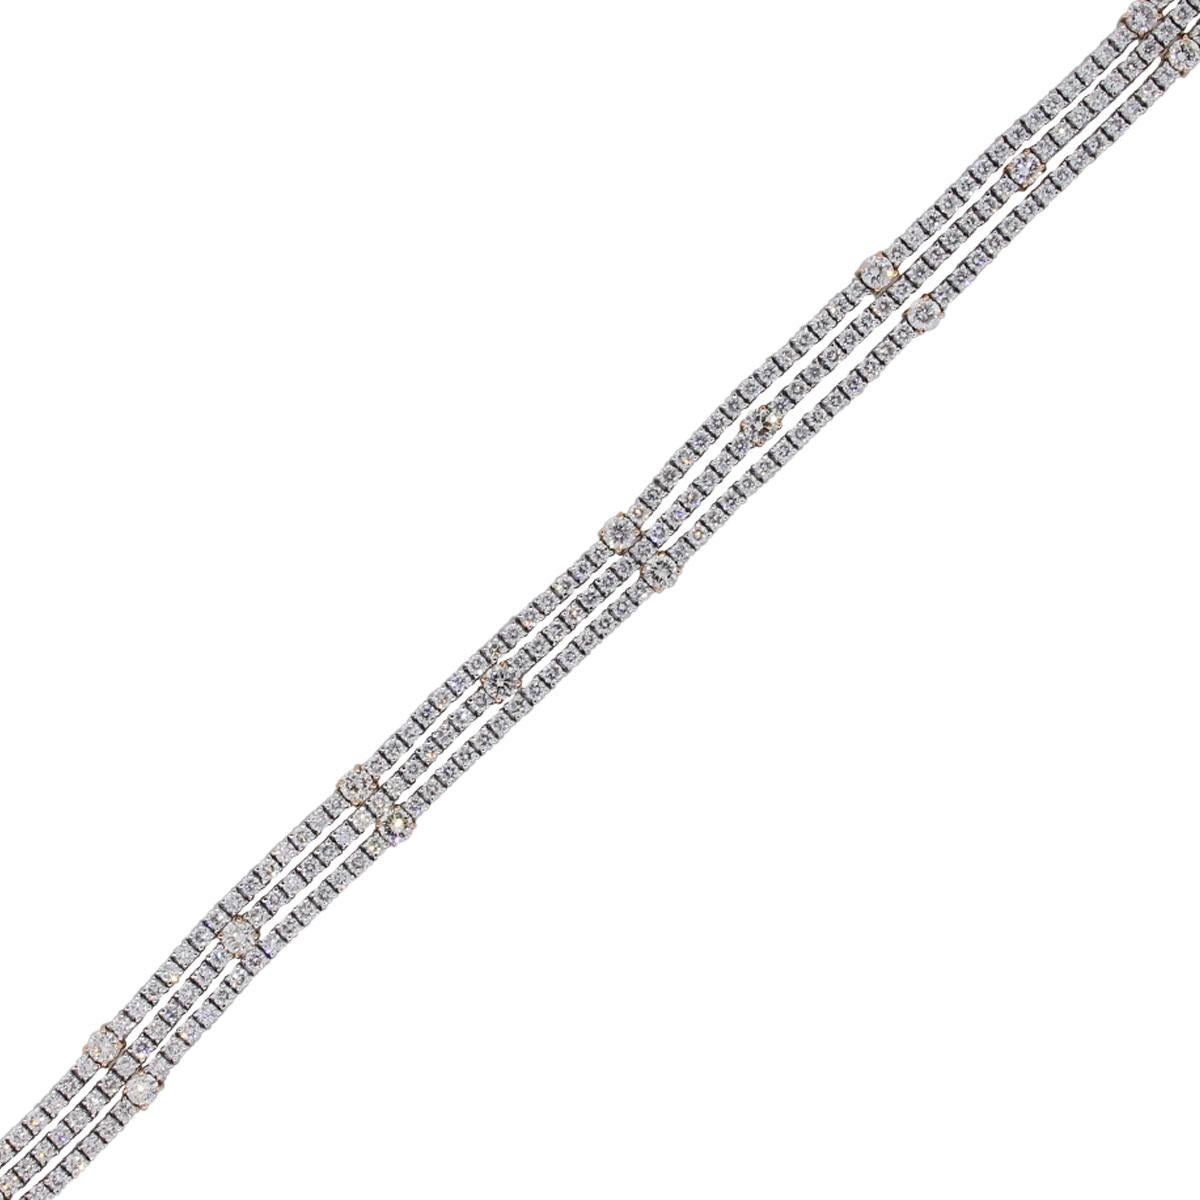 Material: 14k white gold
Diamond Details: Approximately 7ctw of round brilliant diamonds. Diamonds are H/I in color, SI in clarity
Clasp: Tongue in box clasp with safety latch
Measurement: 7″ in length
Total Weight: 18.5g (12dwt)
Additional Details: